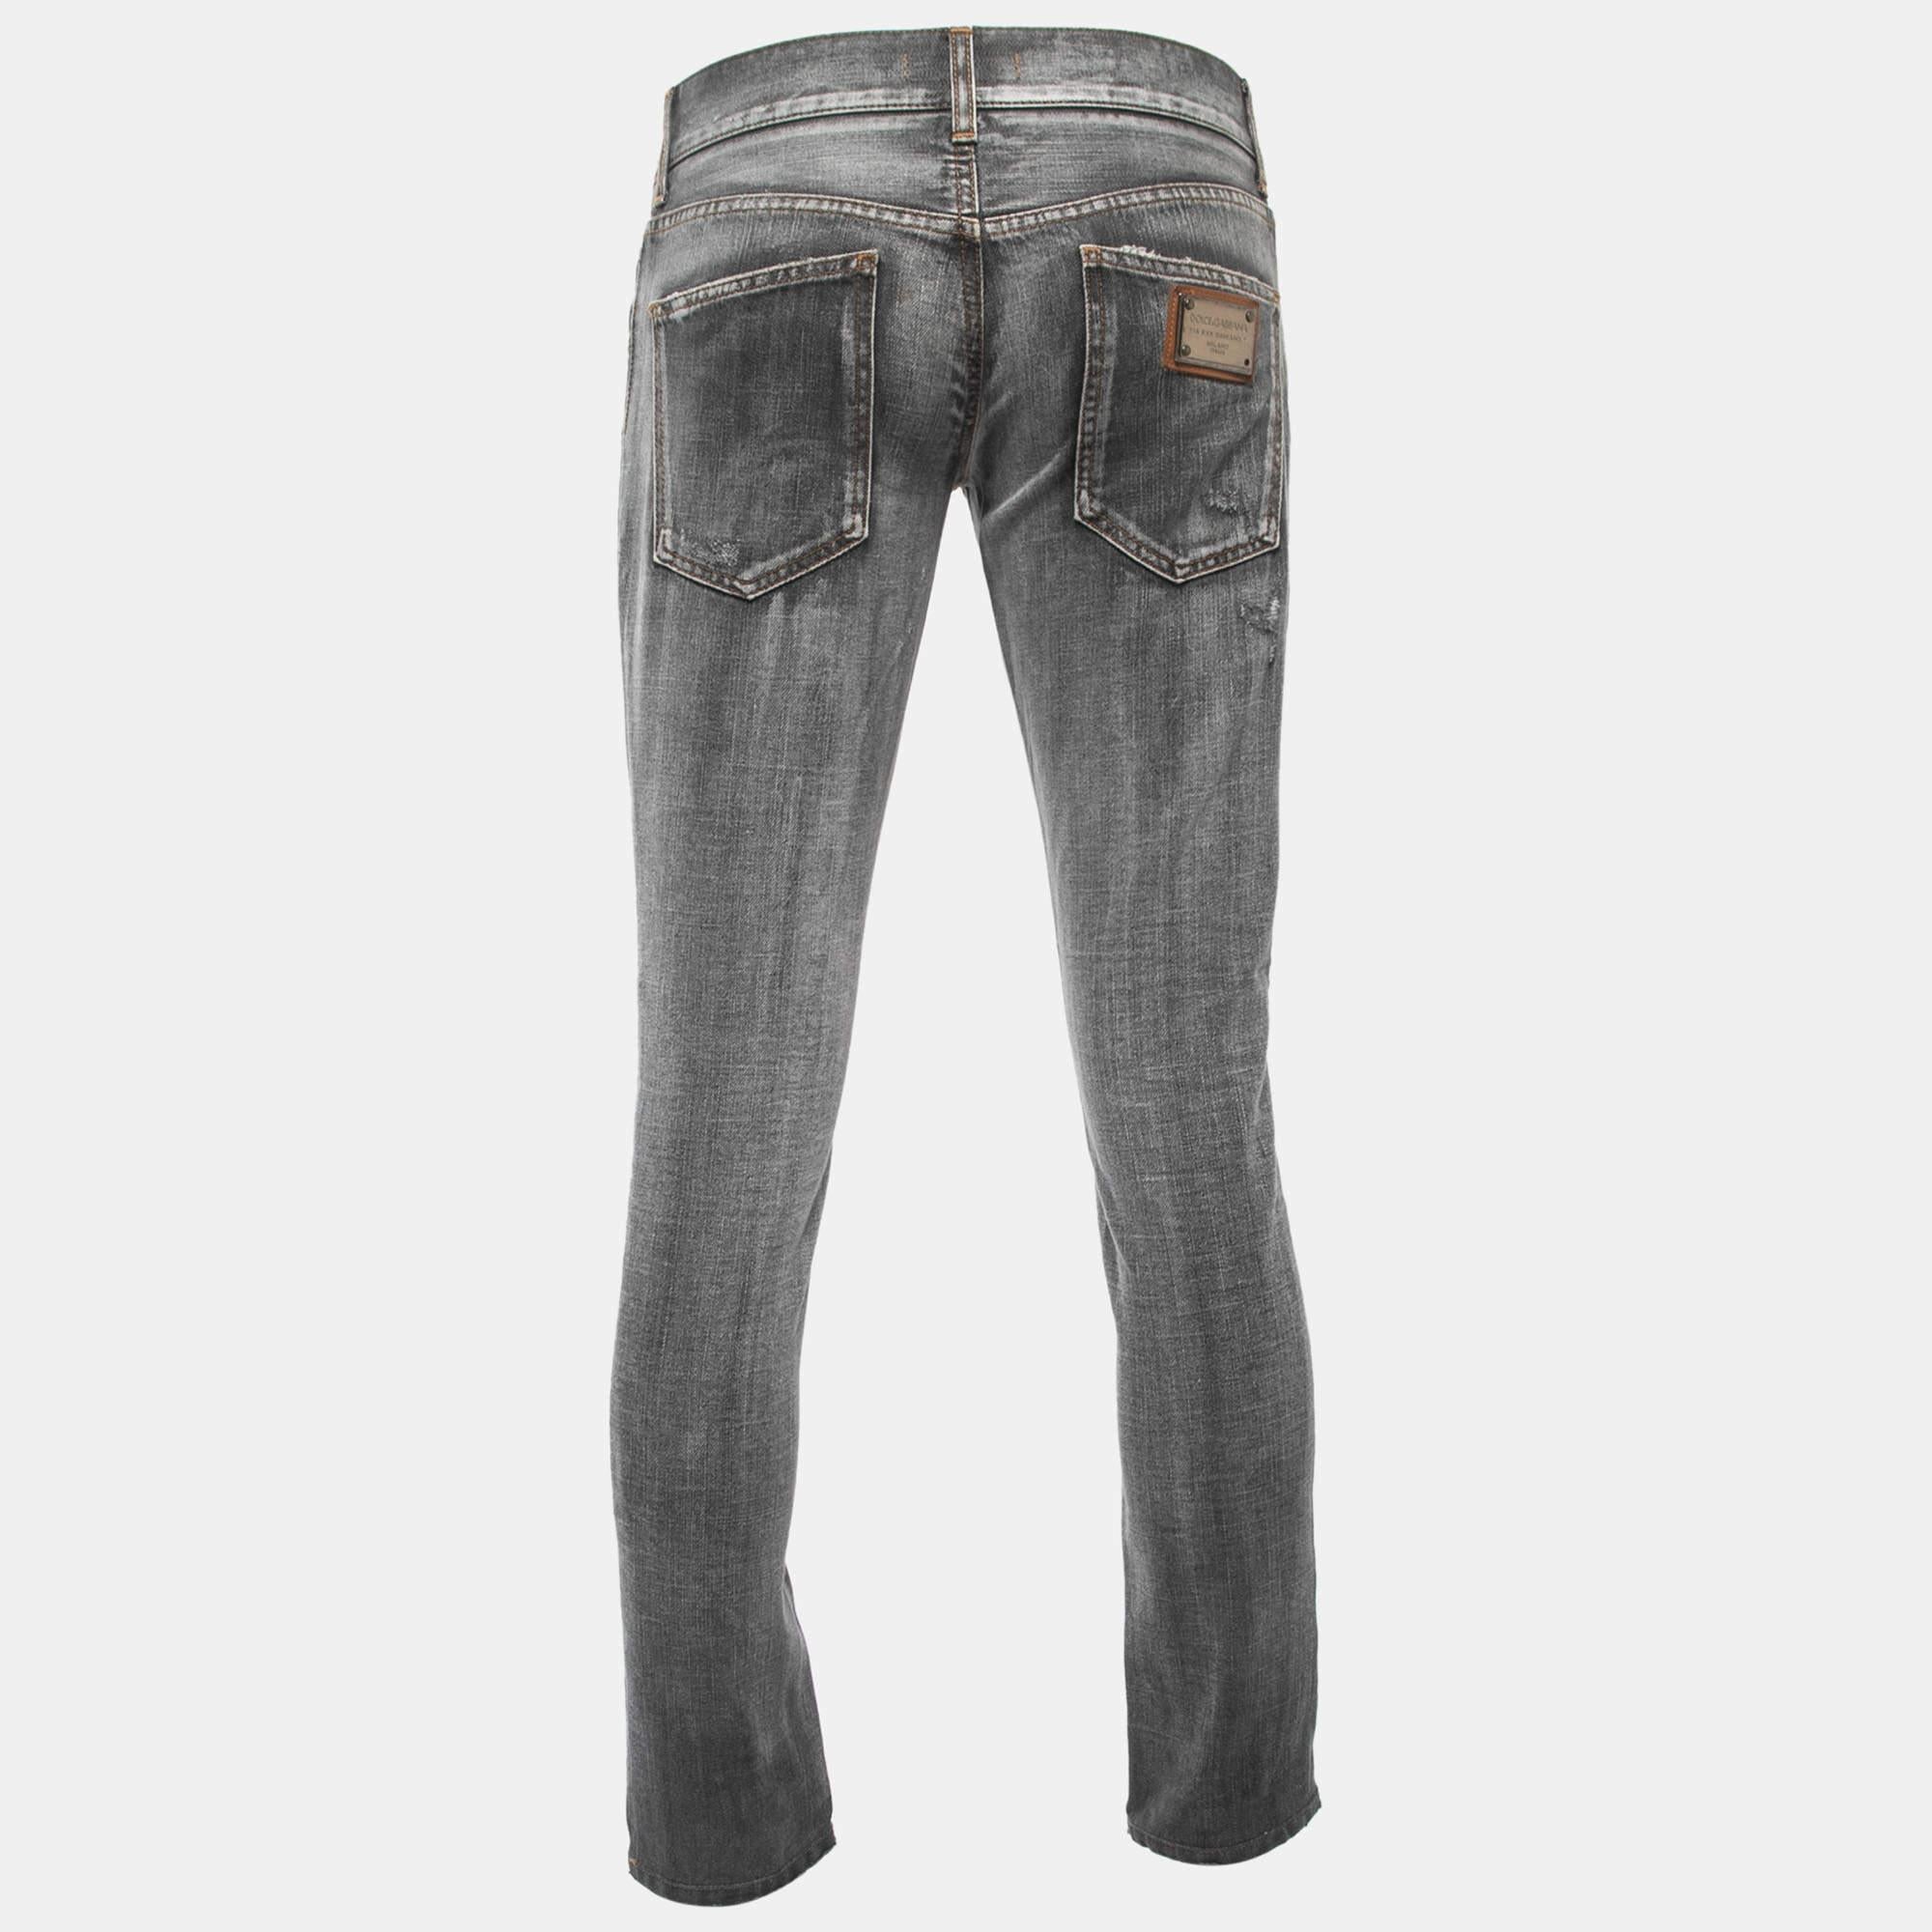 This pair of jeans for men by Dolce & Gabbana ensures a casual style that is full of comfort. Made using cotton, the pair in grey has distressed details, zip closure, and 6 pockets.

